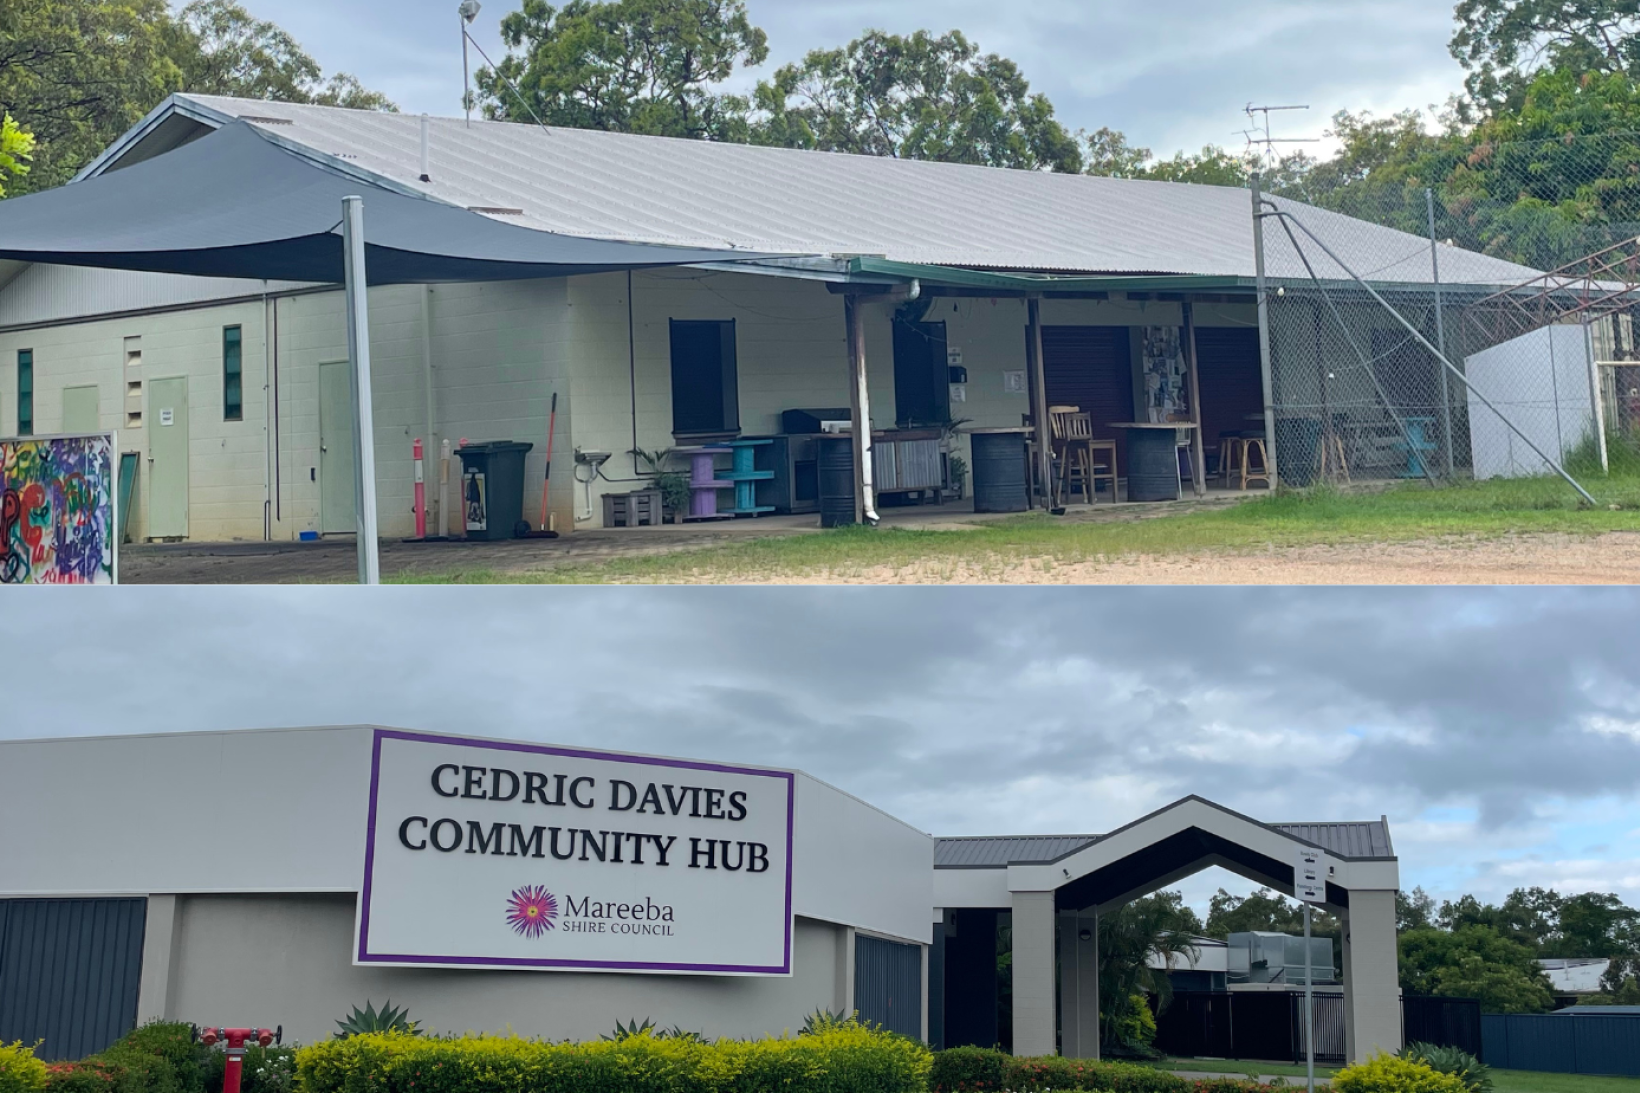 Koah Community Hall is the only designated place of refuge in Mareeba Shire. Council tried to “harden” the Cedric Davies Hub to become a place of refuge for Mareeba locals but funding was rejected by the State Government.